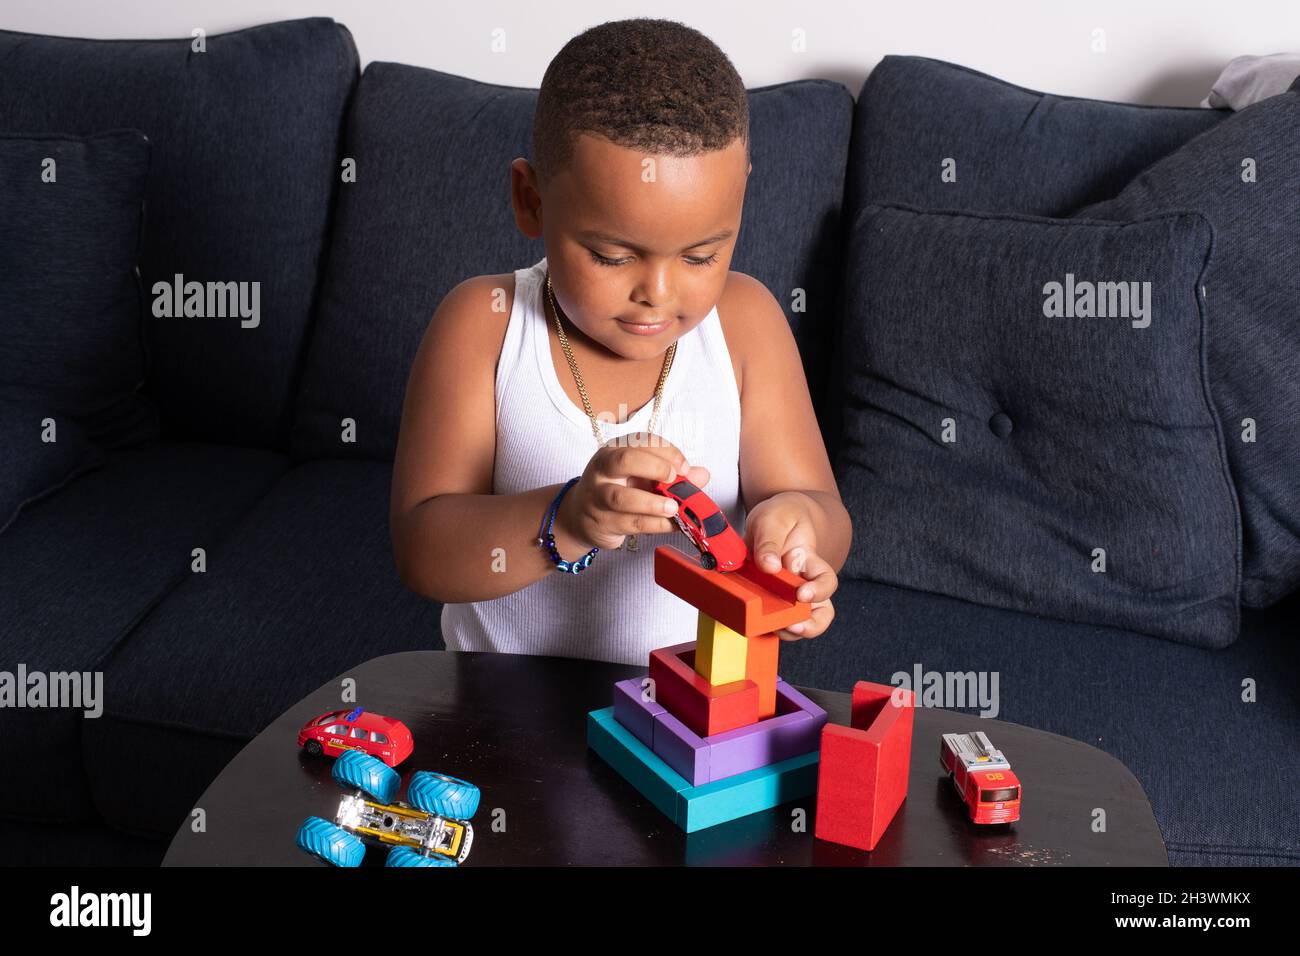 Preschool age child at home playing with wooden blocks puzzle and toy cars Stock Photo